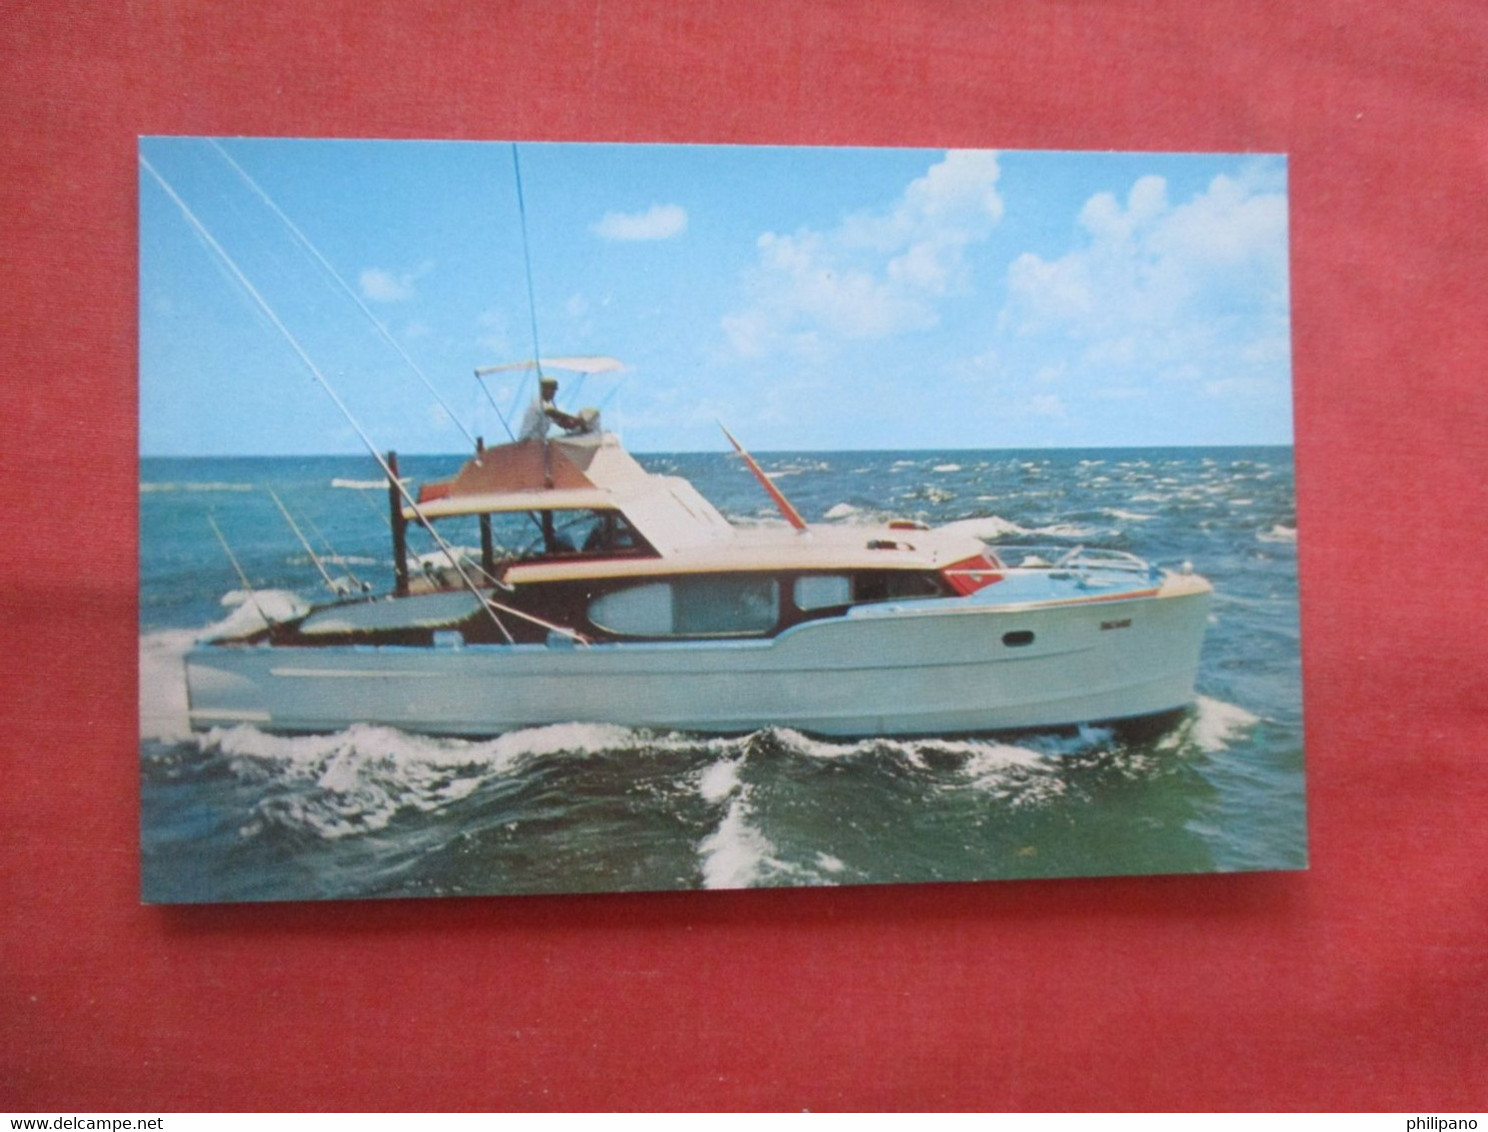 Captain Ralph McKeral On Yacht Bacardi-  Open For Charter Sport Fishing  West Palm Beach    Florida     Ref 5081 - West Palm Beach